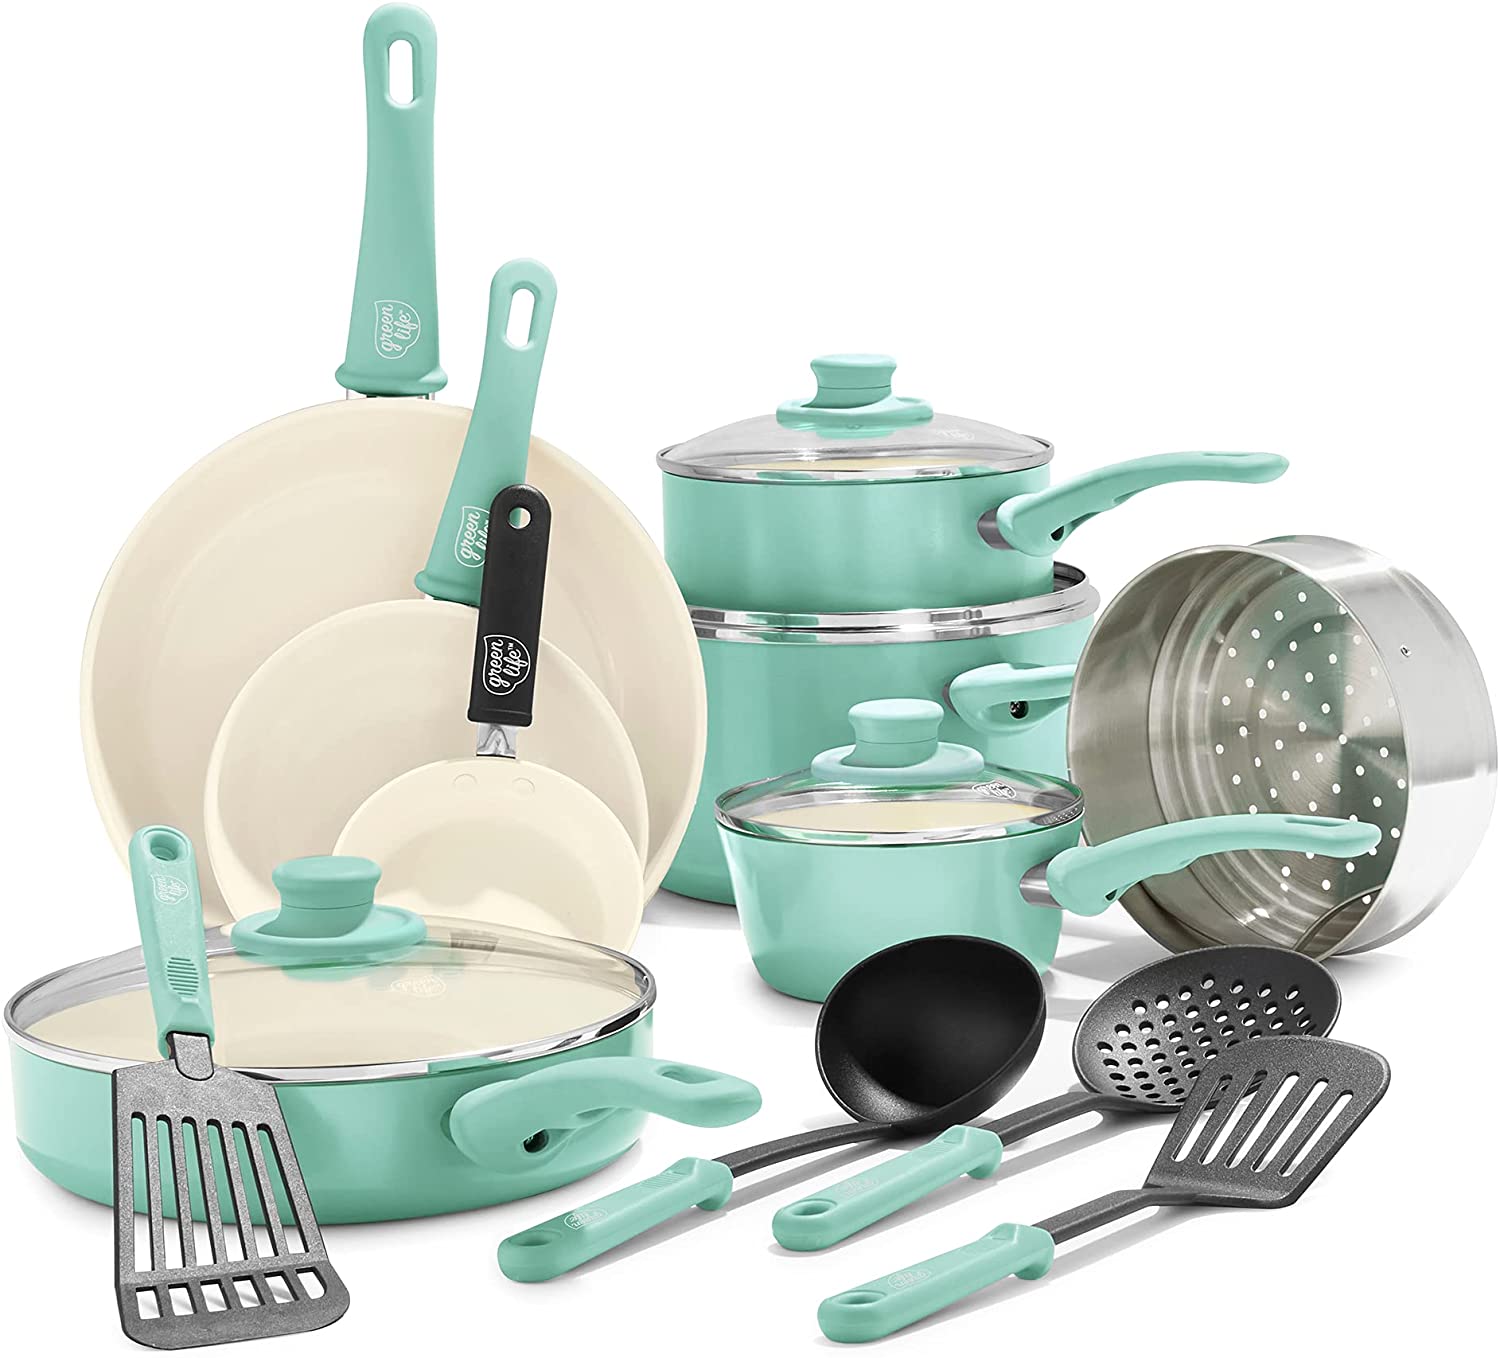 GreenLife Ceramic Cookware Set Cyber Monday Markdown!